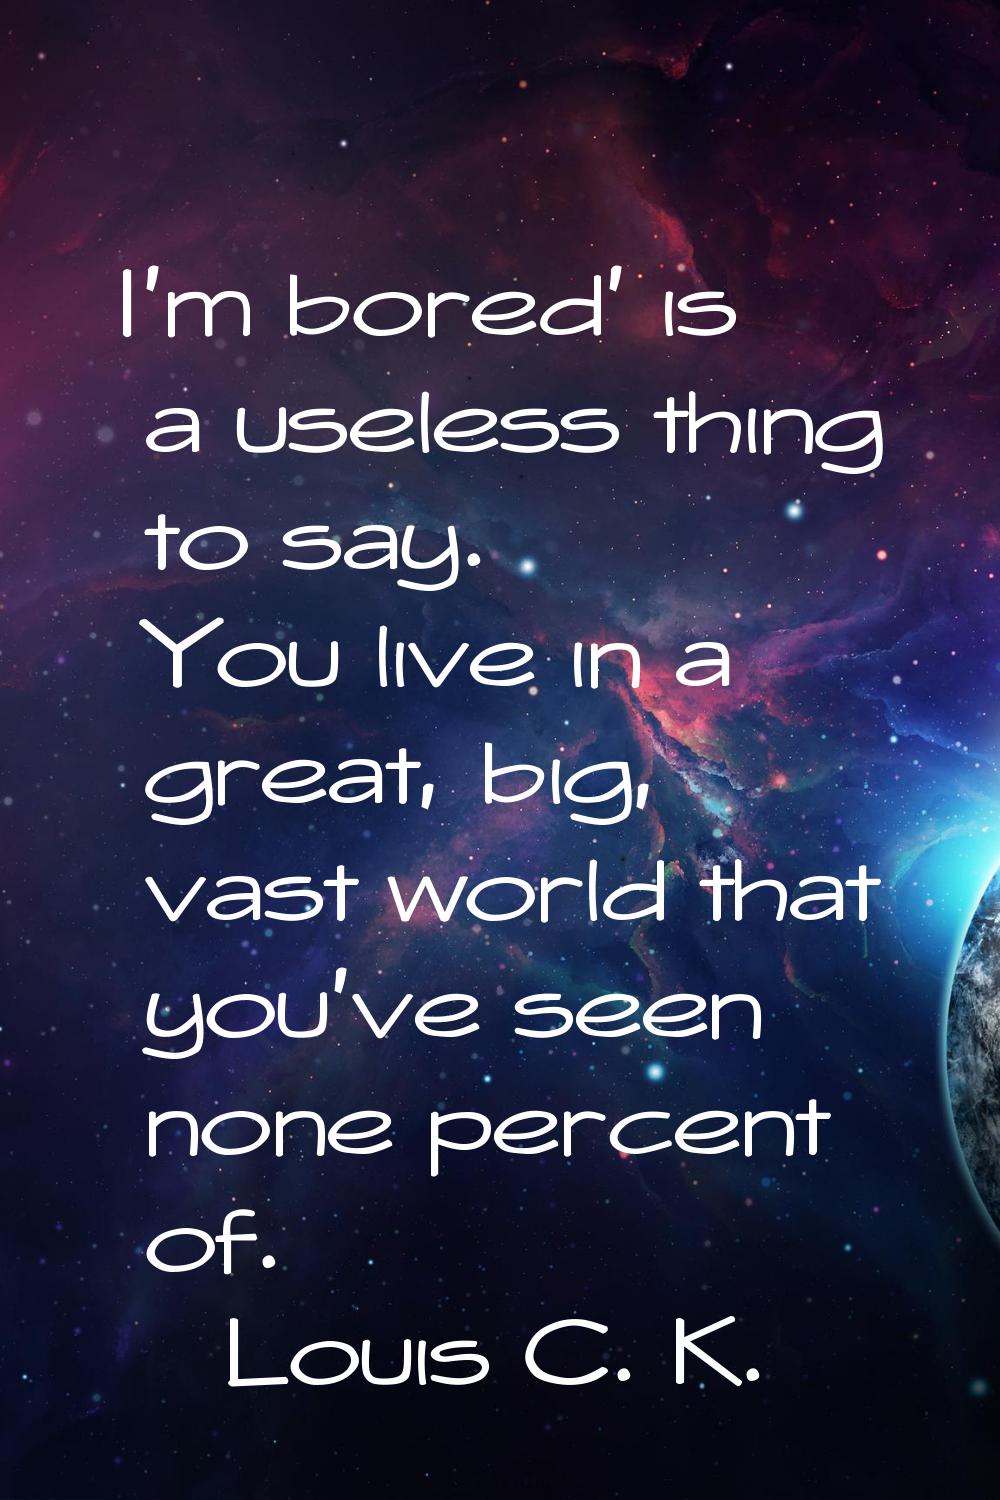 I'm bored' is a useless thing to say. You live in a great, big, vast world that you've seen none pe